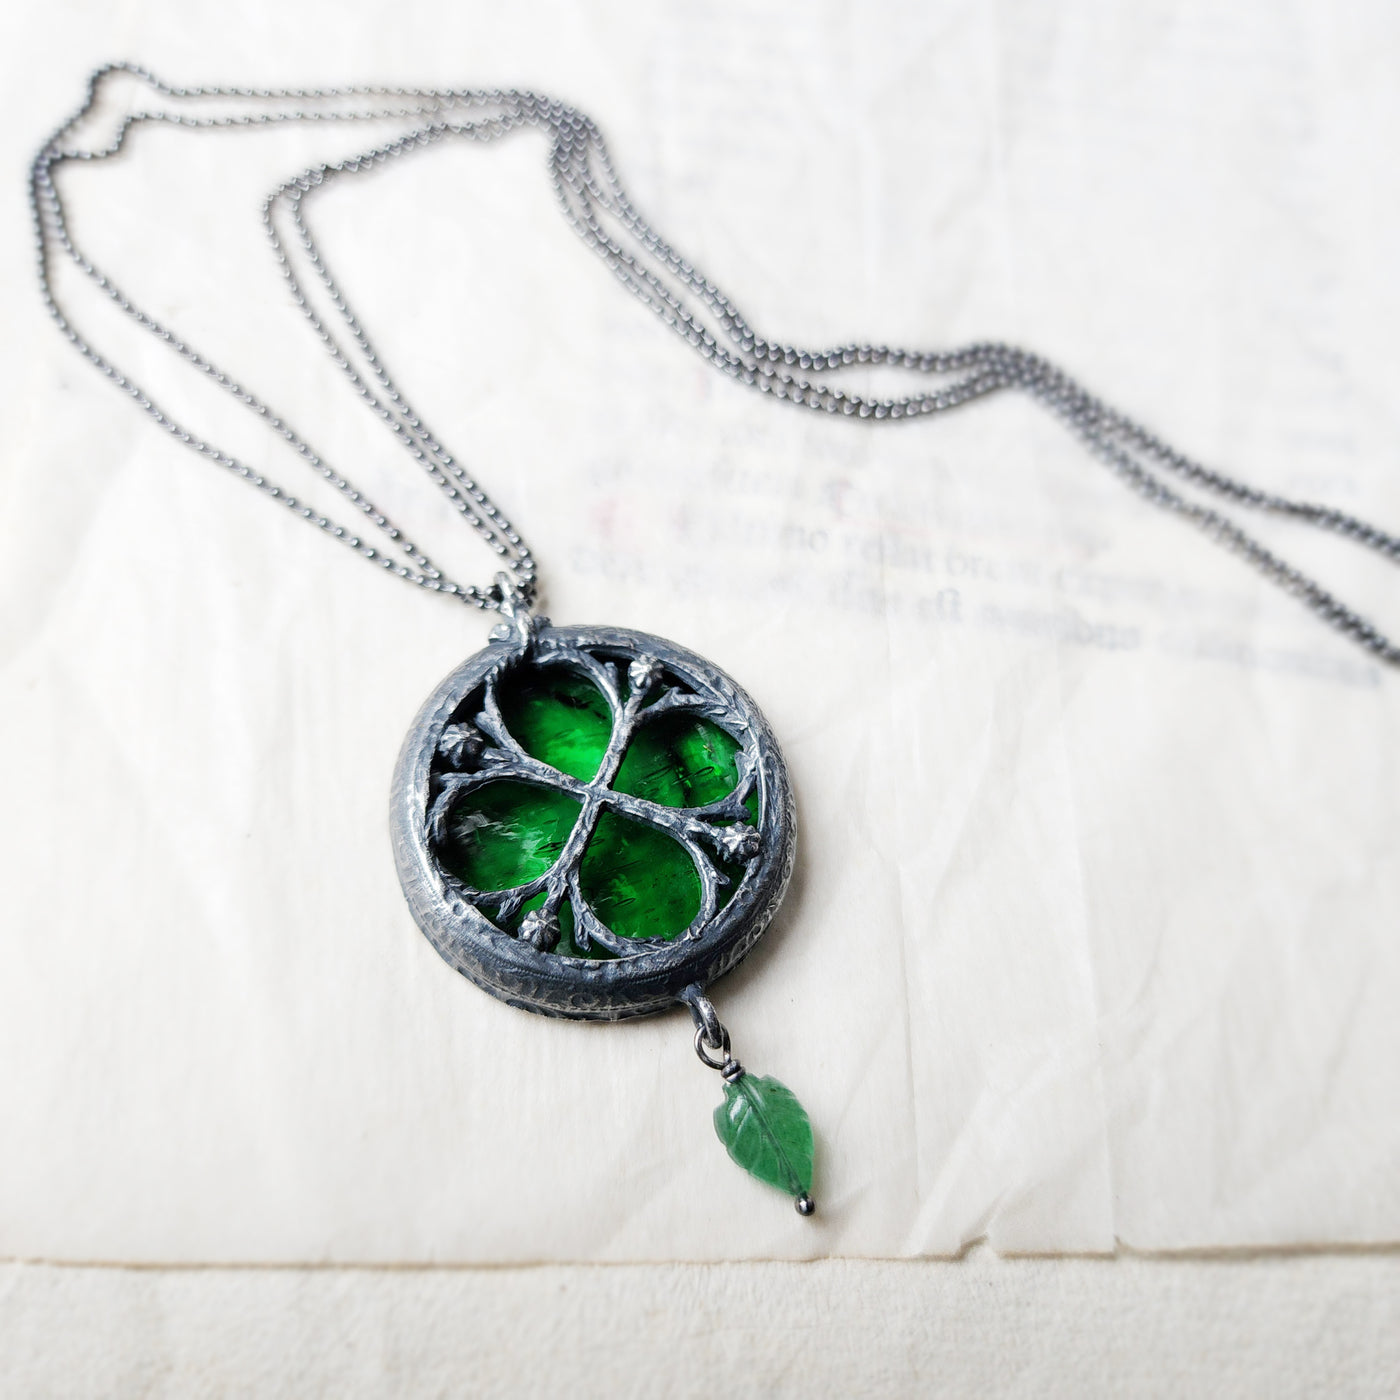 forest dreams - floriated clover miracle window amulet